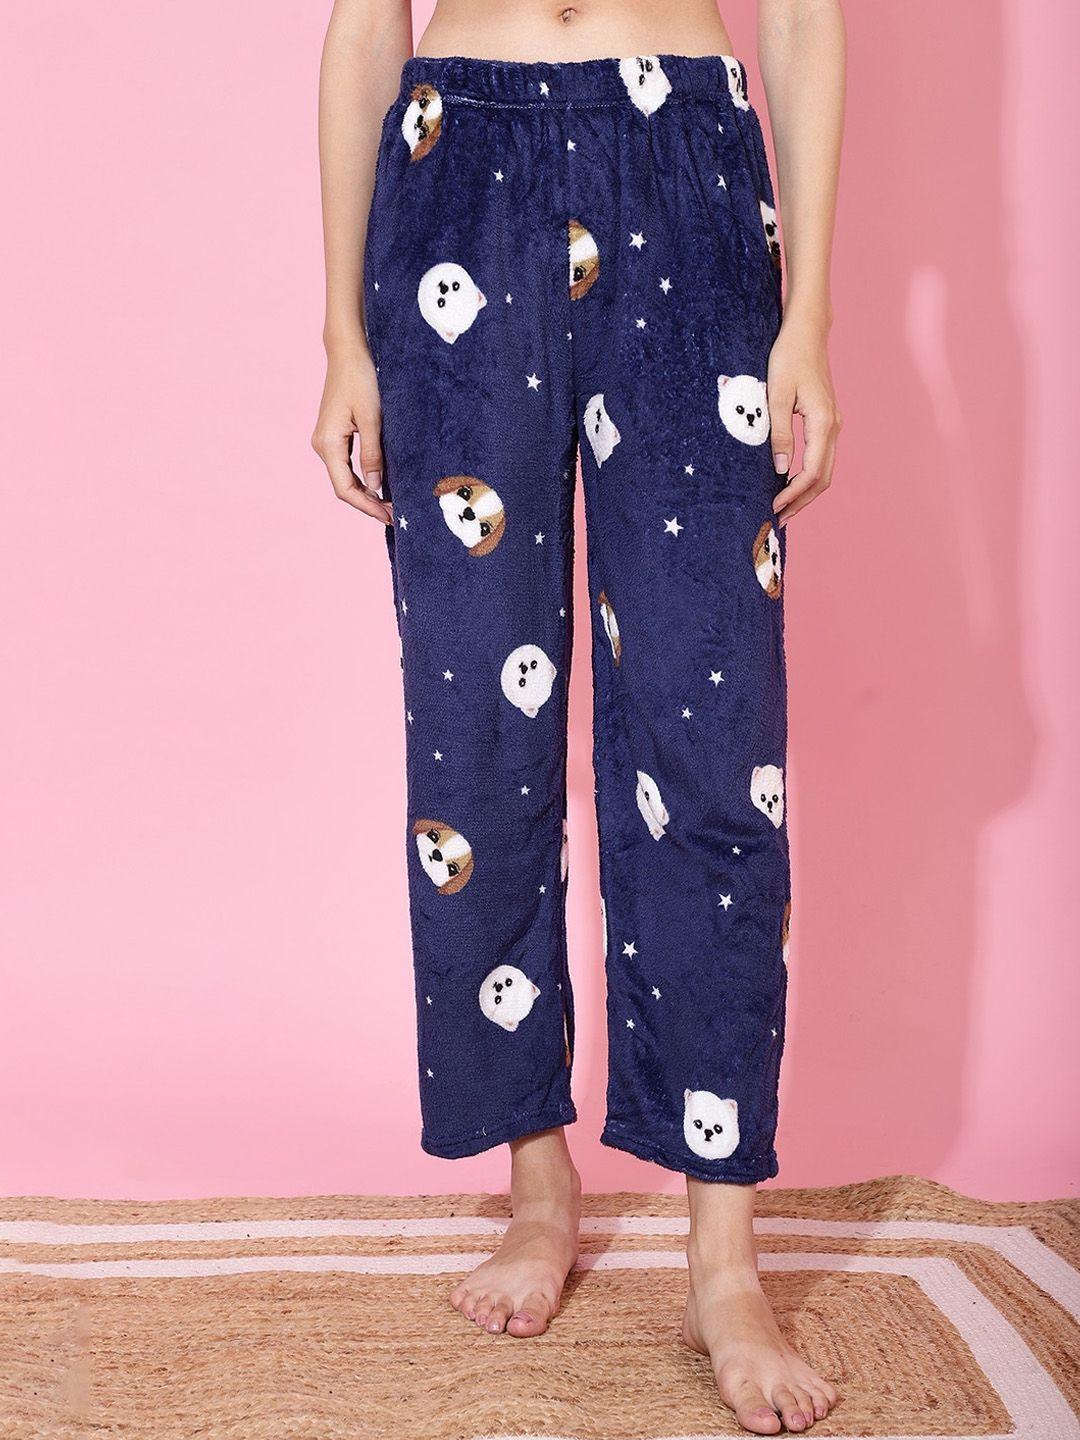 tag 7 women conversational printed mid-rise lounge pants